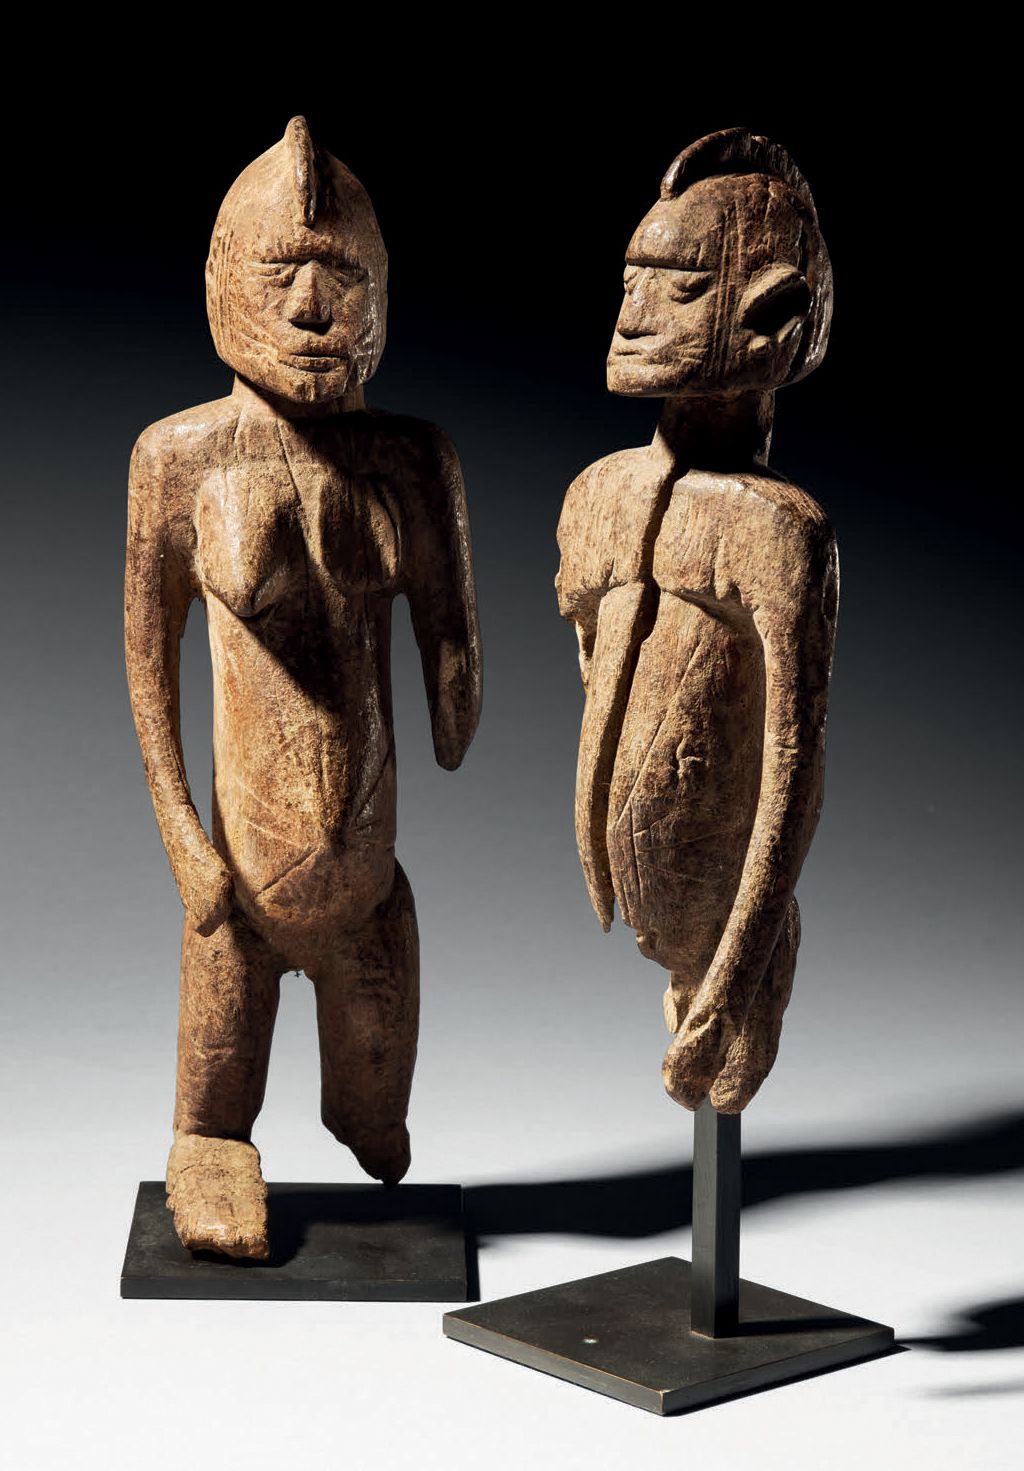 Null - COUPLE OF MOSSI STATUES, BURKINA FASO
Wood
H. 28 and 23 cm
Old couple of &hellip;